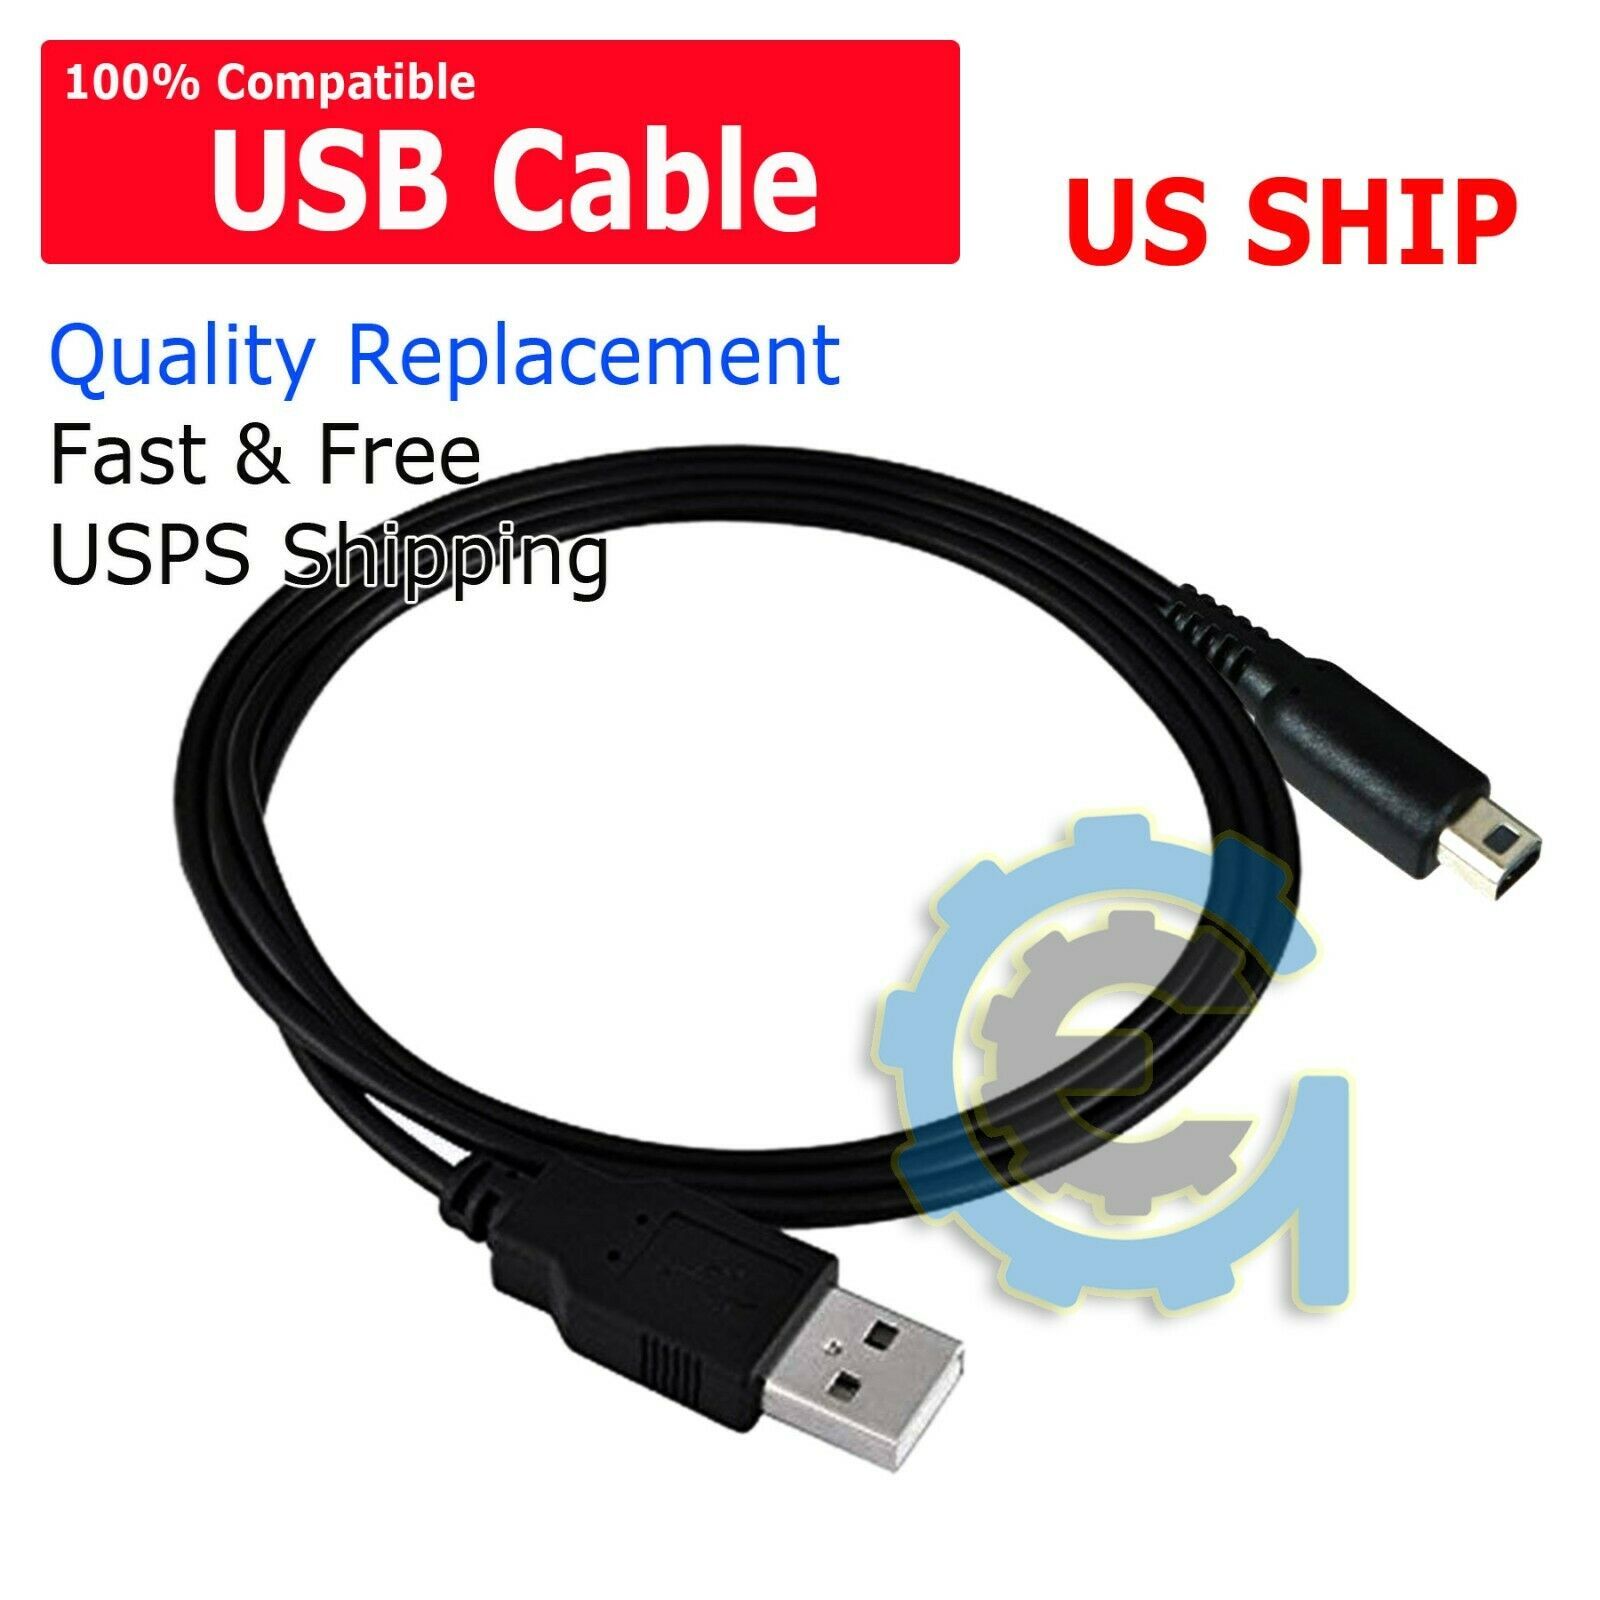 New Usb Power Charger Charging Cable For Nintendo 3ds Dsi Ndsi Xl Pada A126